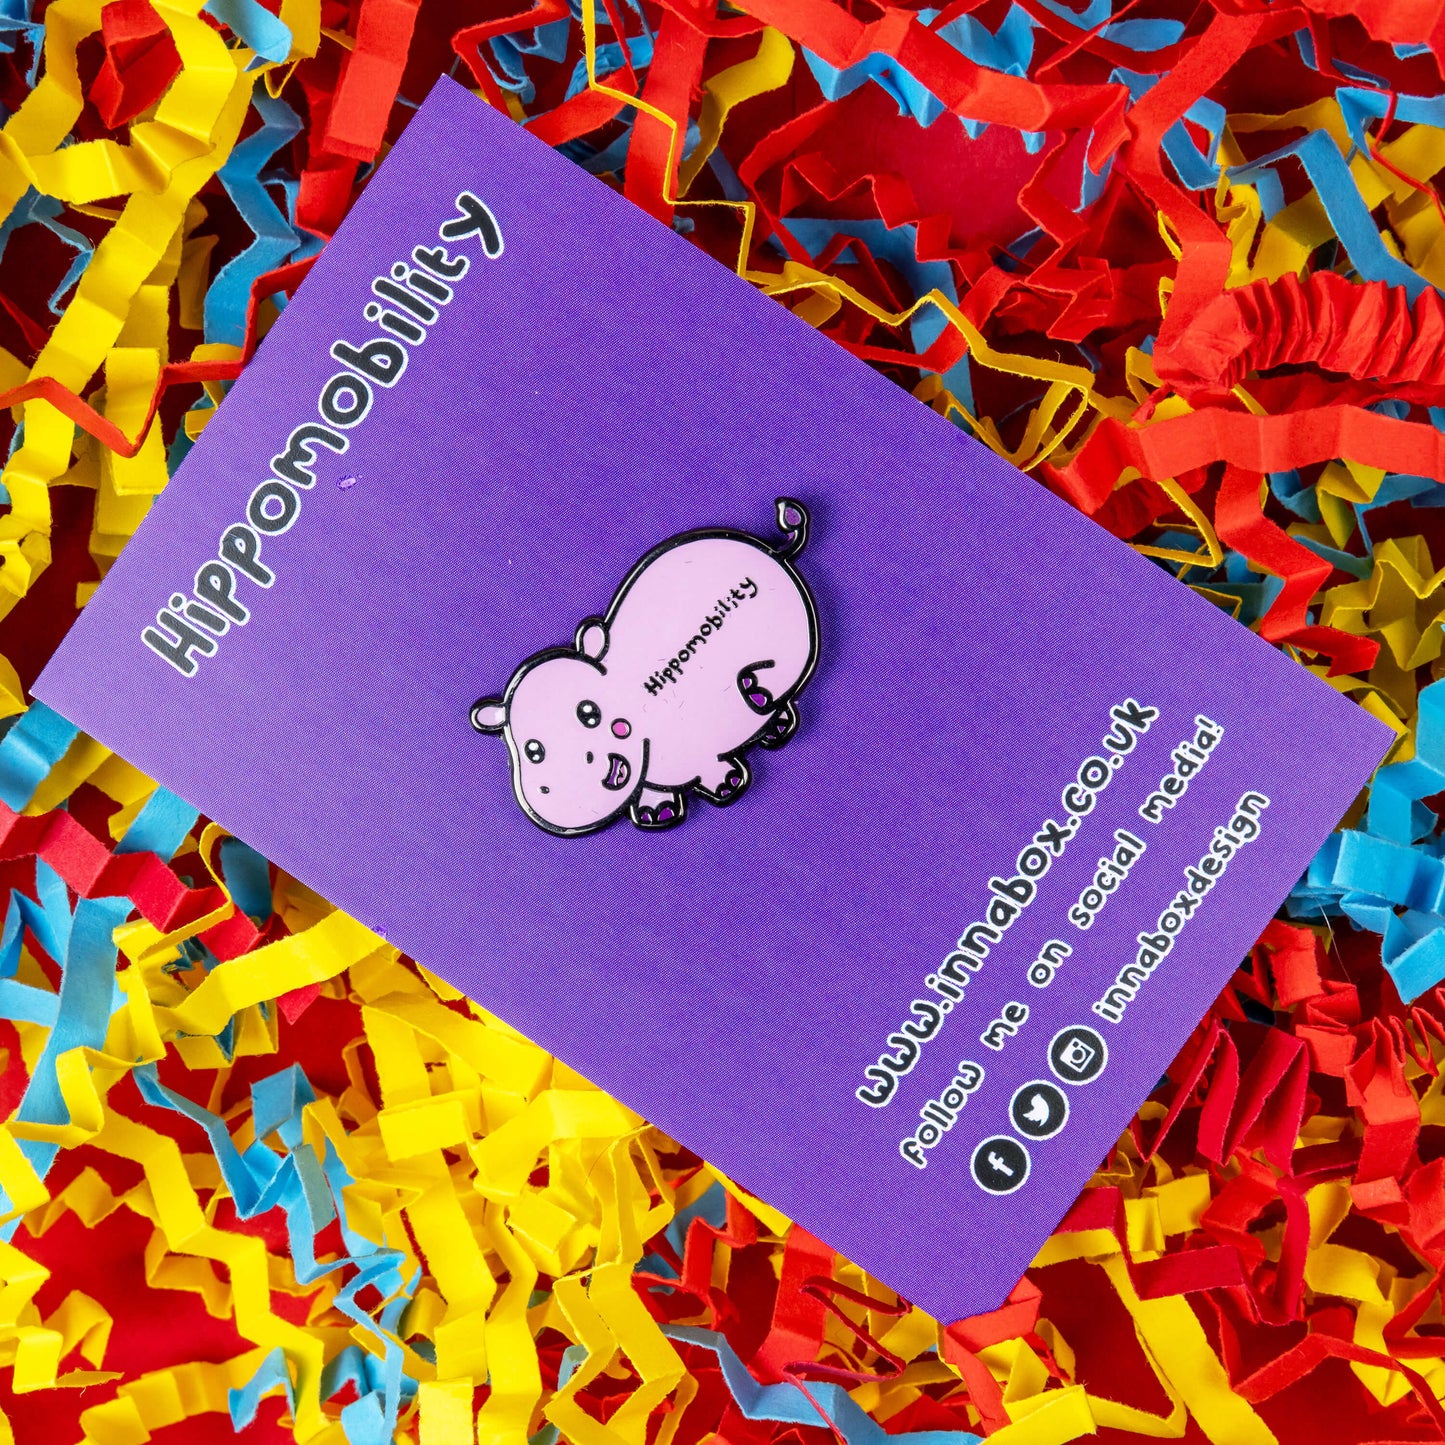 Hippmobility Enamel Pin - Hyper Mobility shown on purple backing card on a red, blue and yellow coloured card confetti background. The enamel pin is of a pink happy hippo with the text hippomobility written on its stomach. The enamel pin is designed to raise awareness for hyper mobility